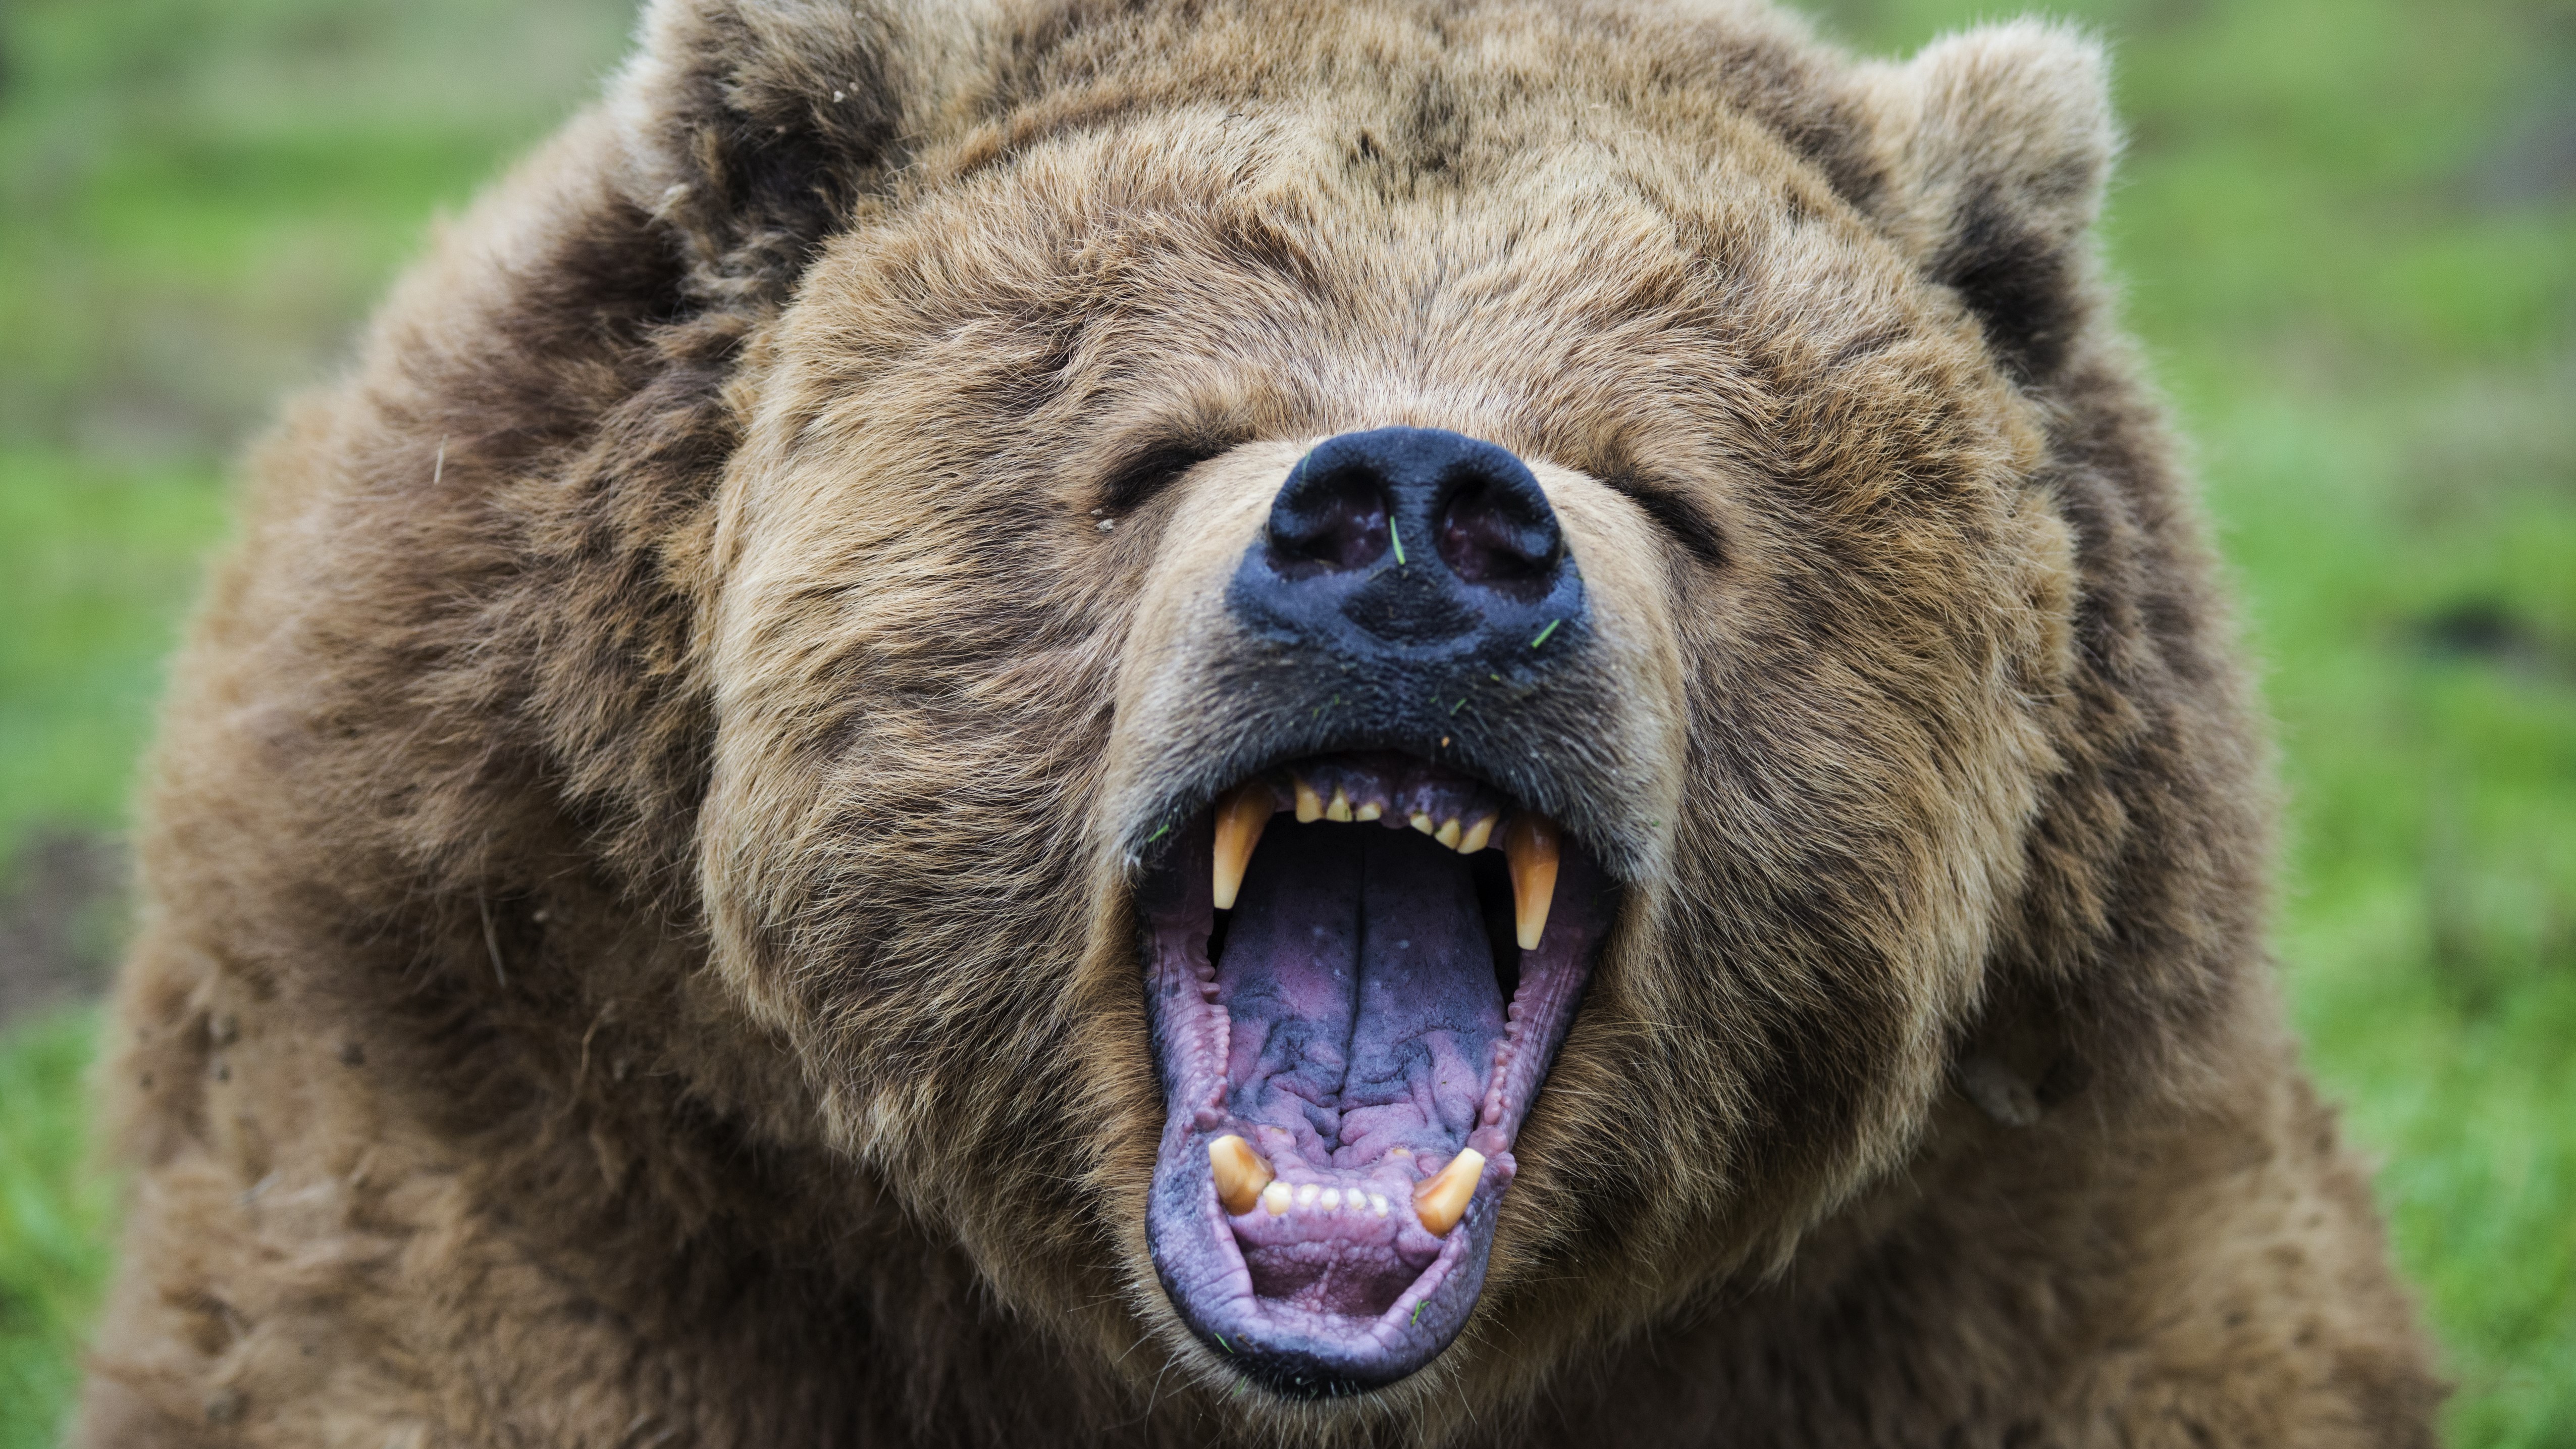 grizzly bear facing the camera with its mouth open and teeth showing